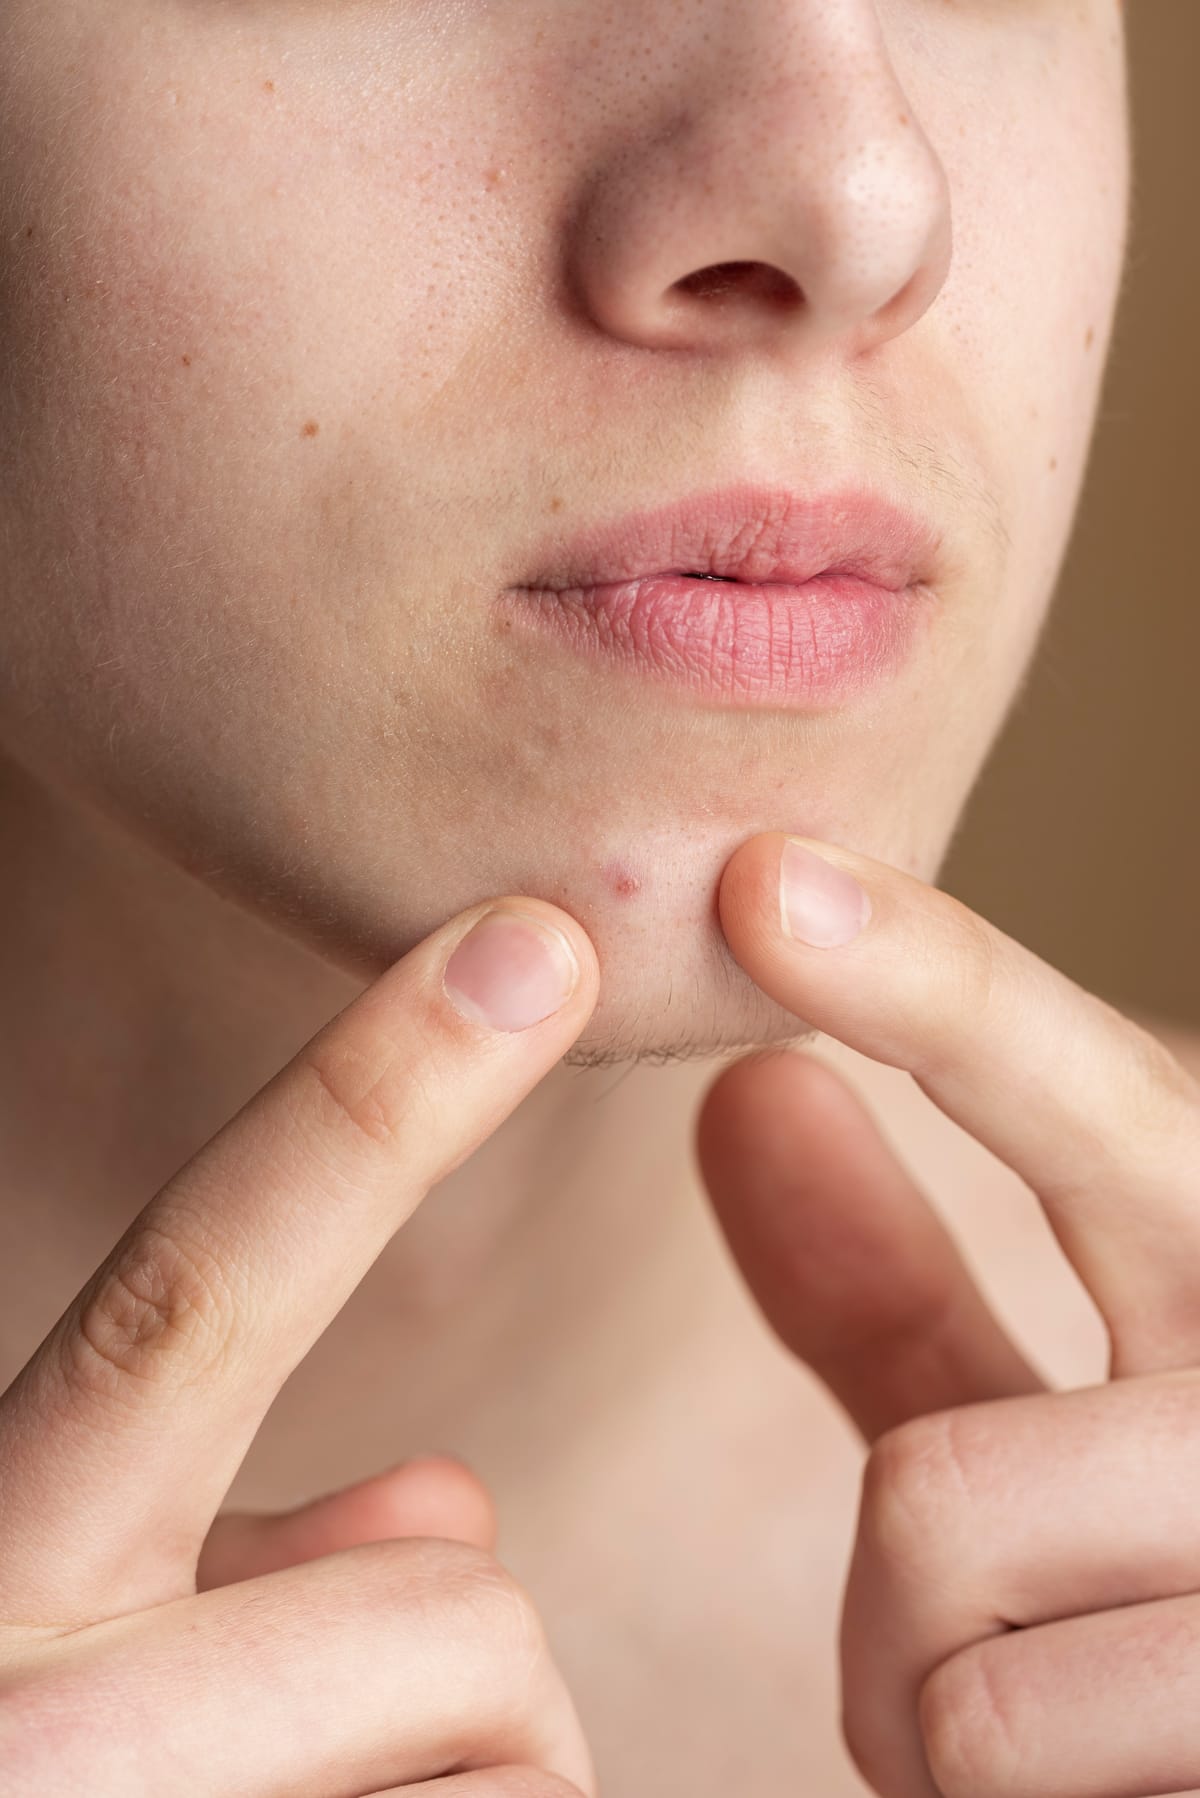 Do Pimple Patches Work on Unpopped Pimples?